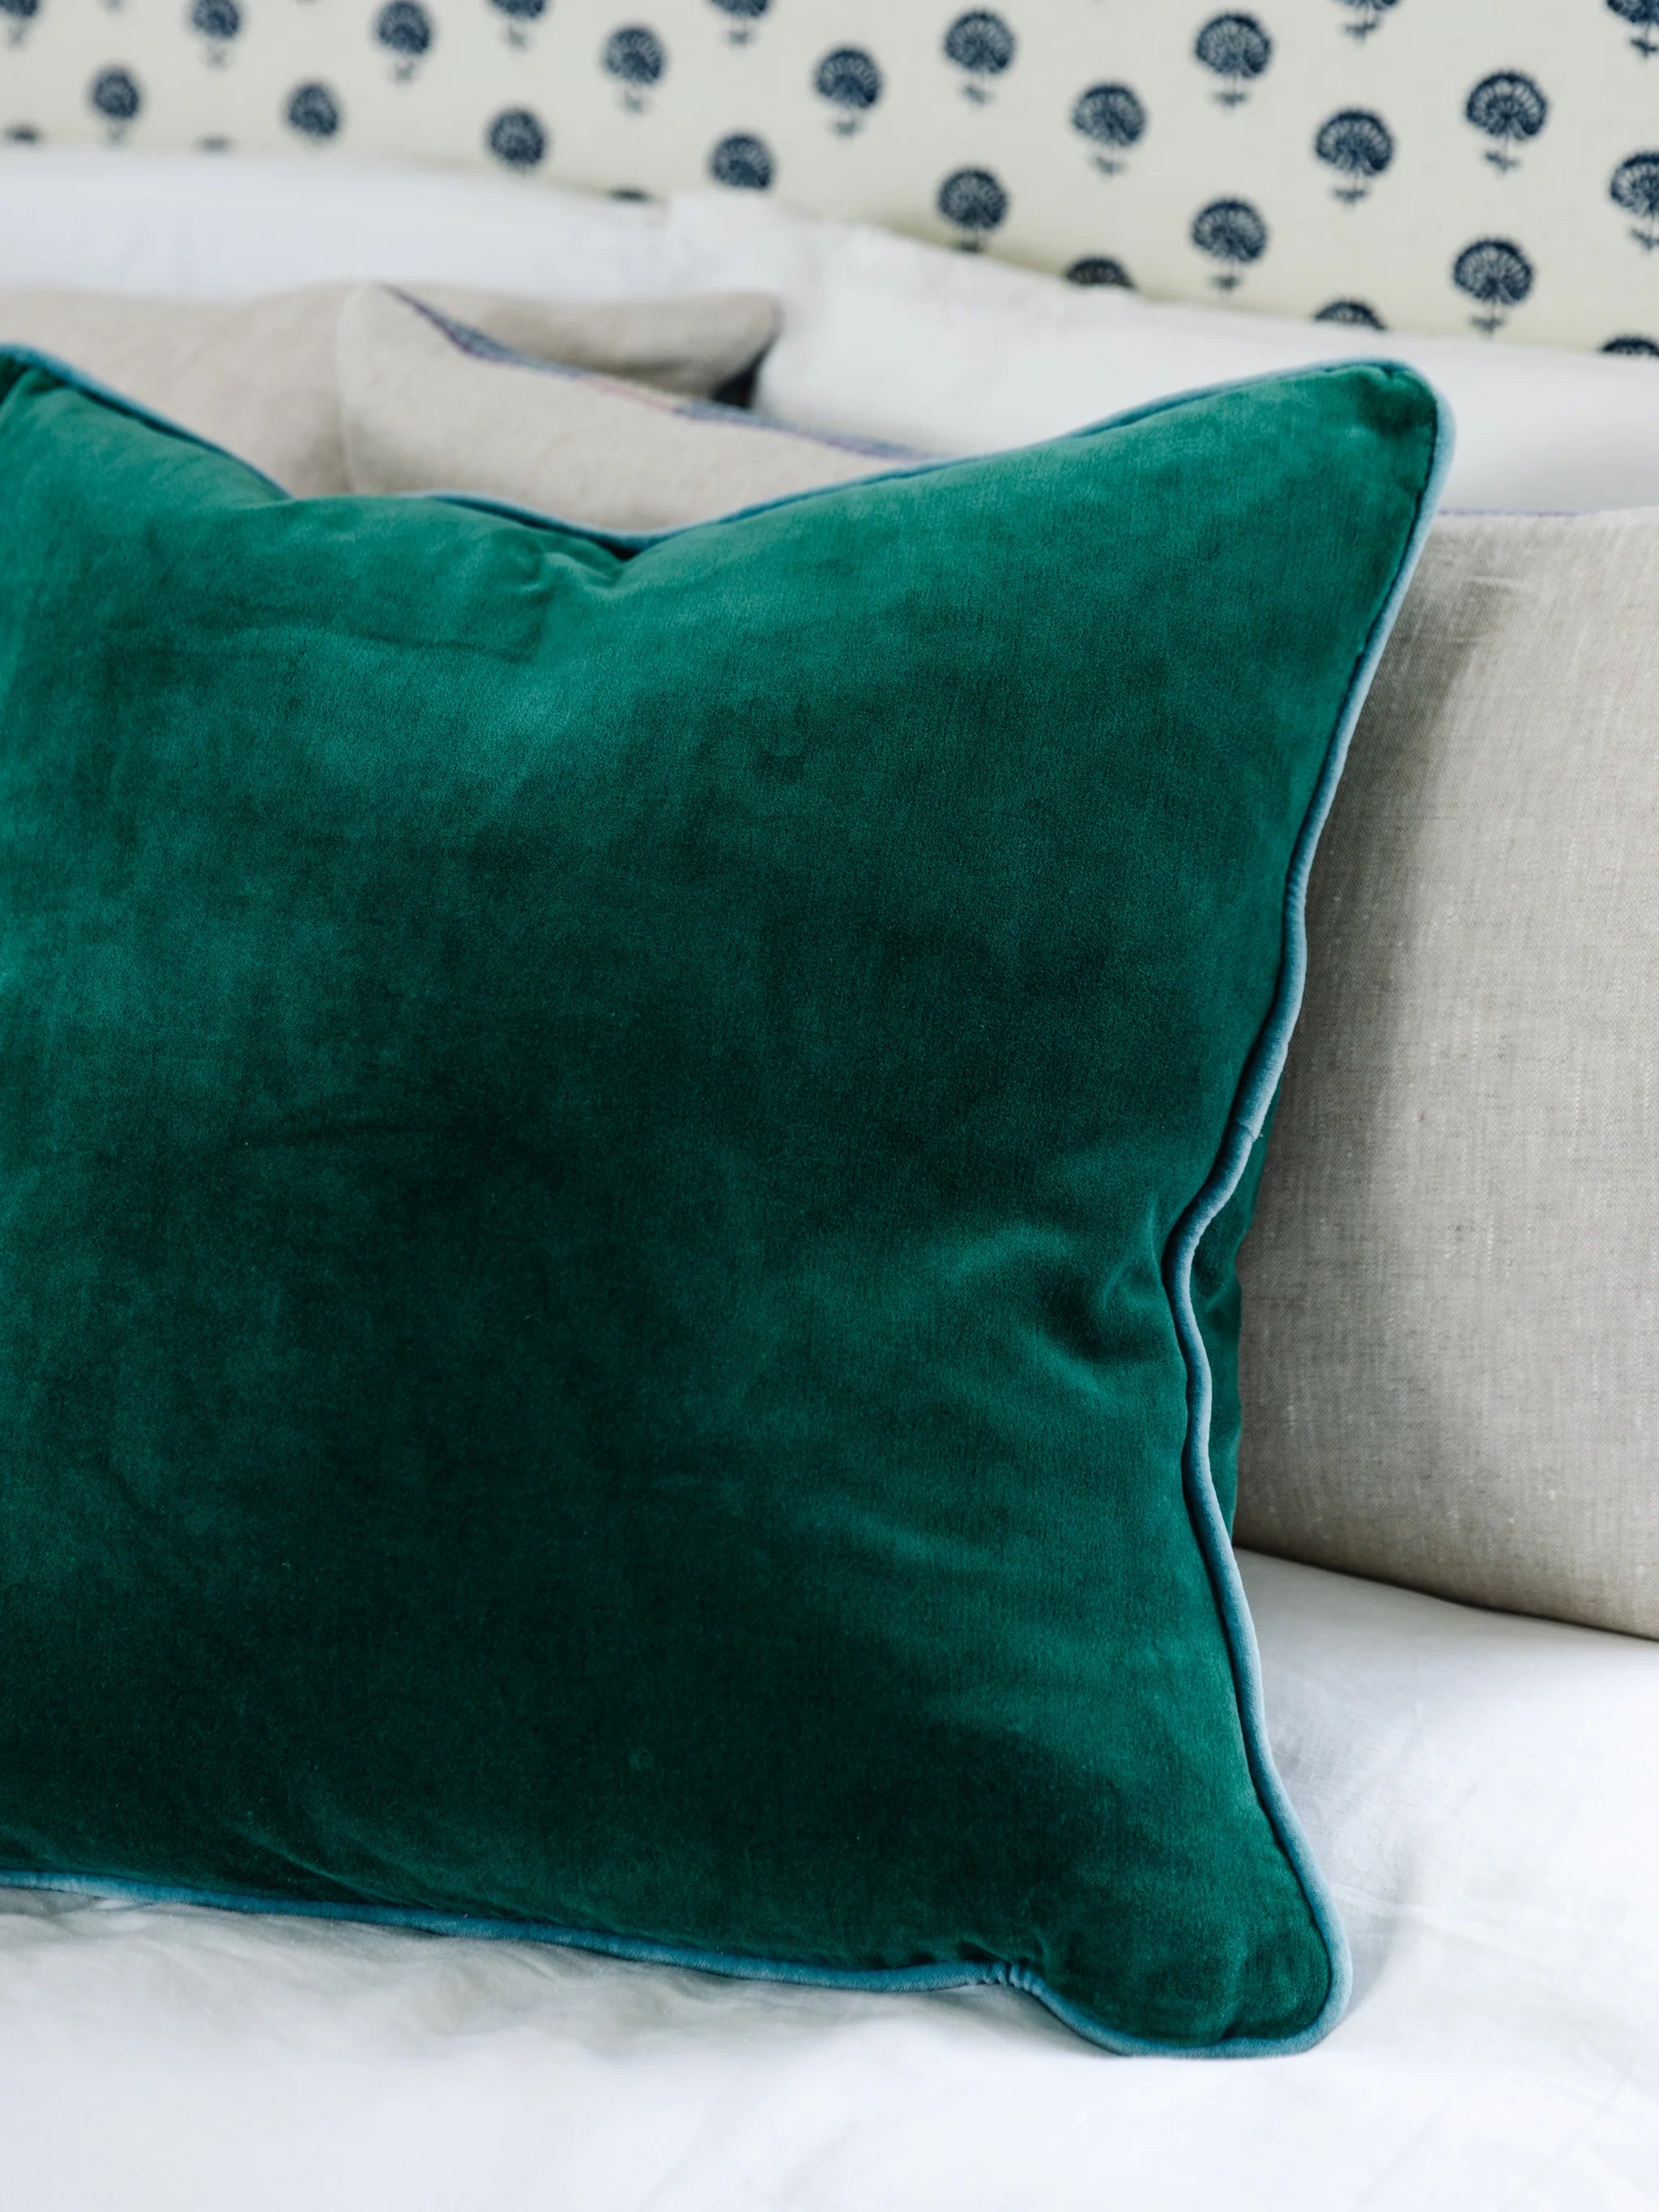 Velvet Pillow with insert- 2 Color Options Available